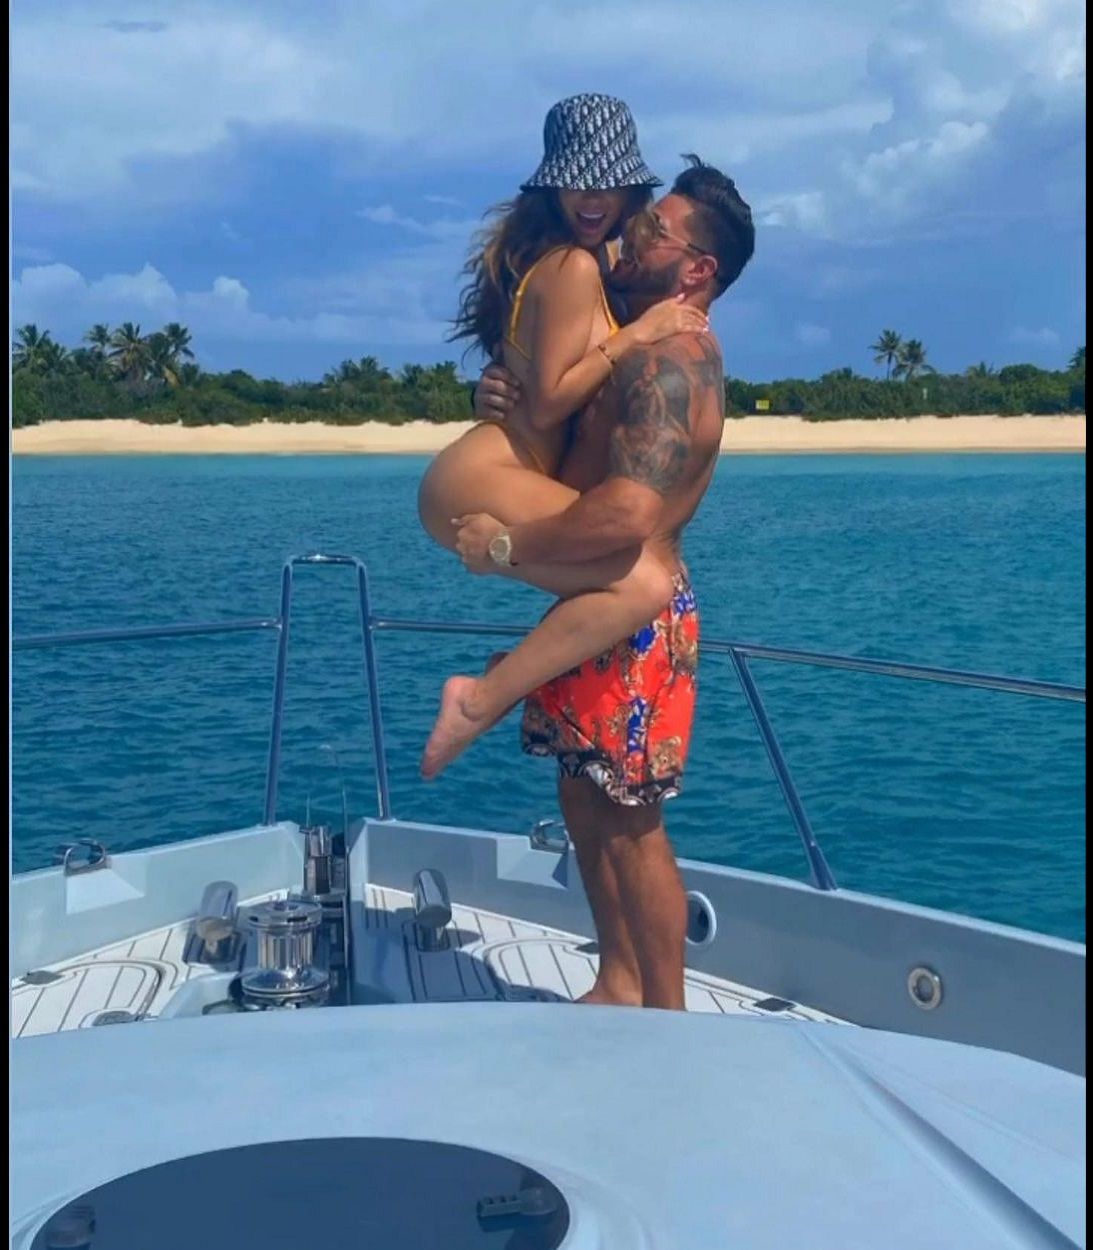 Ronnie Ortiz-Magro and his new girlfriend